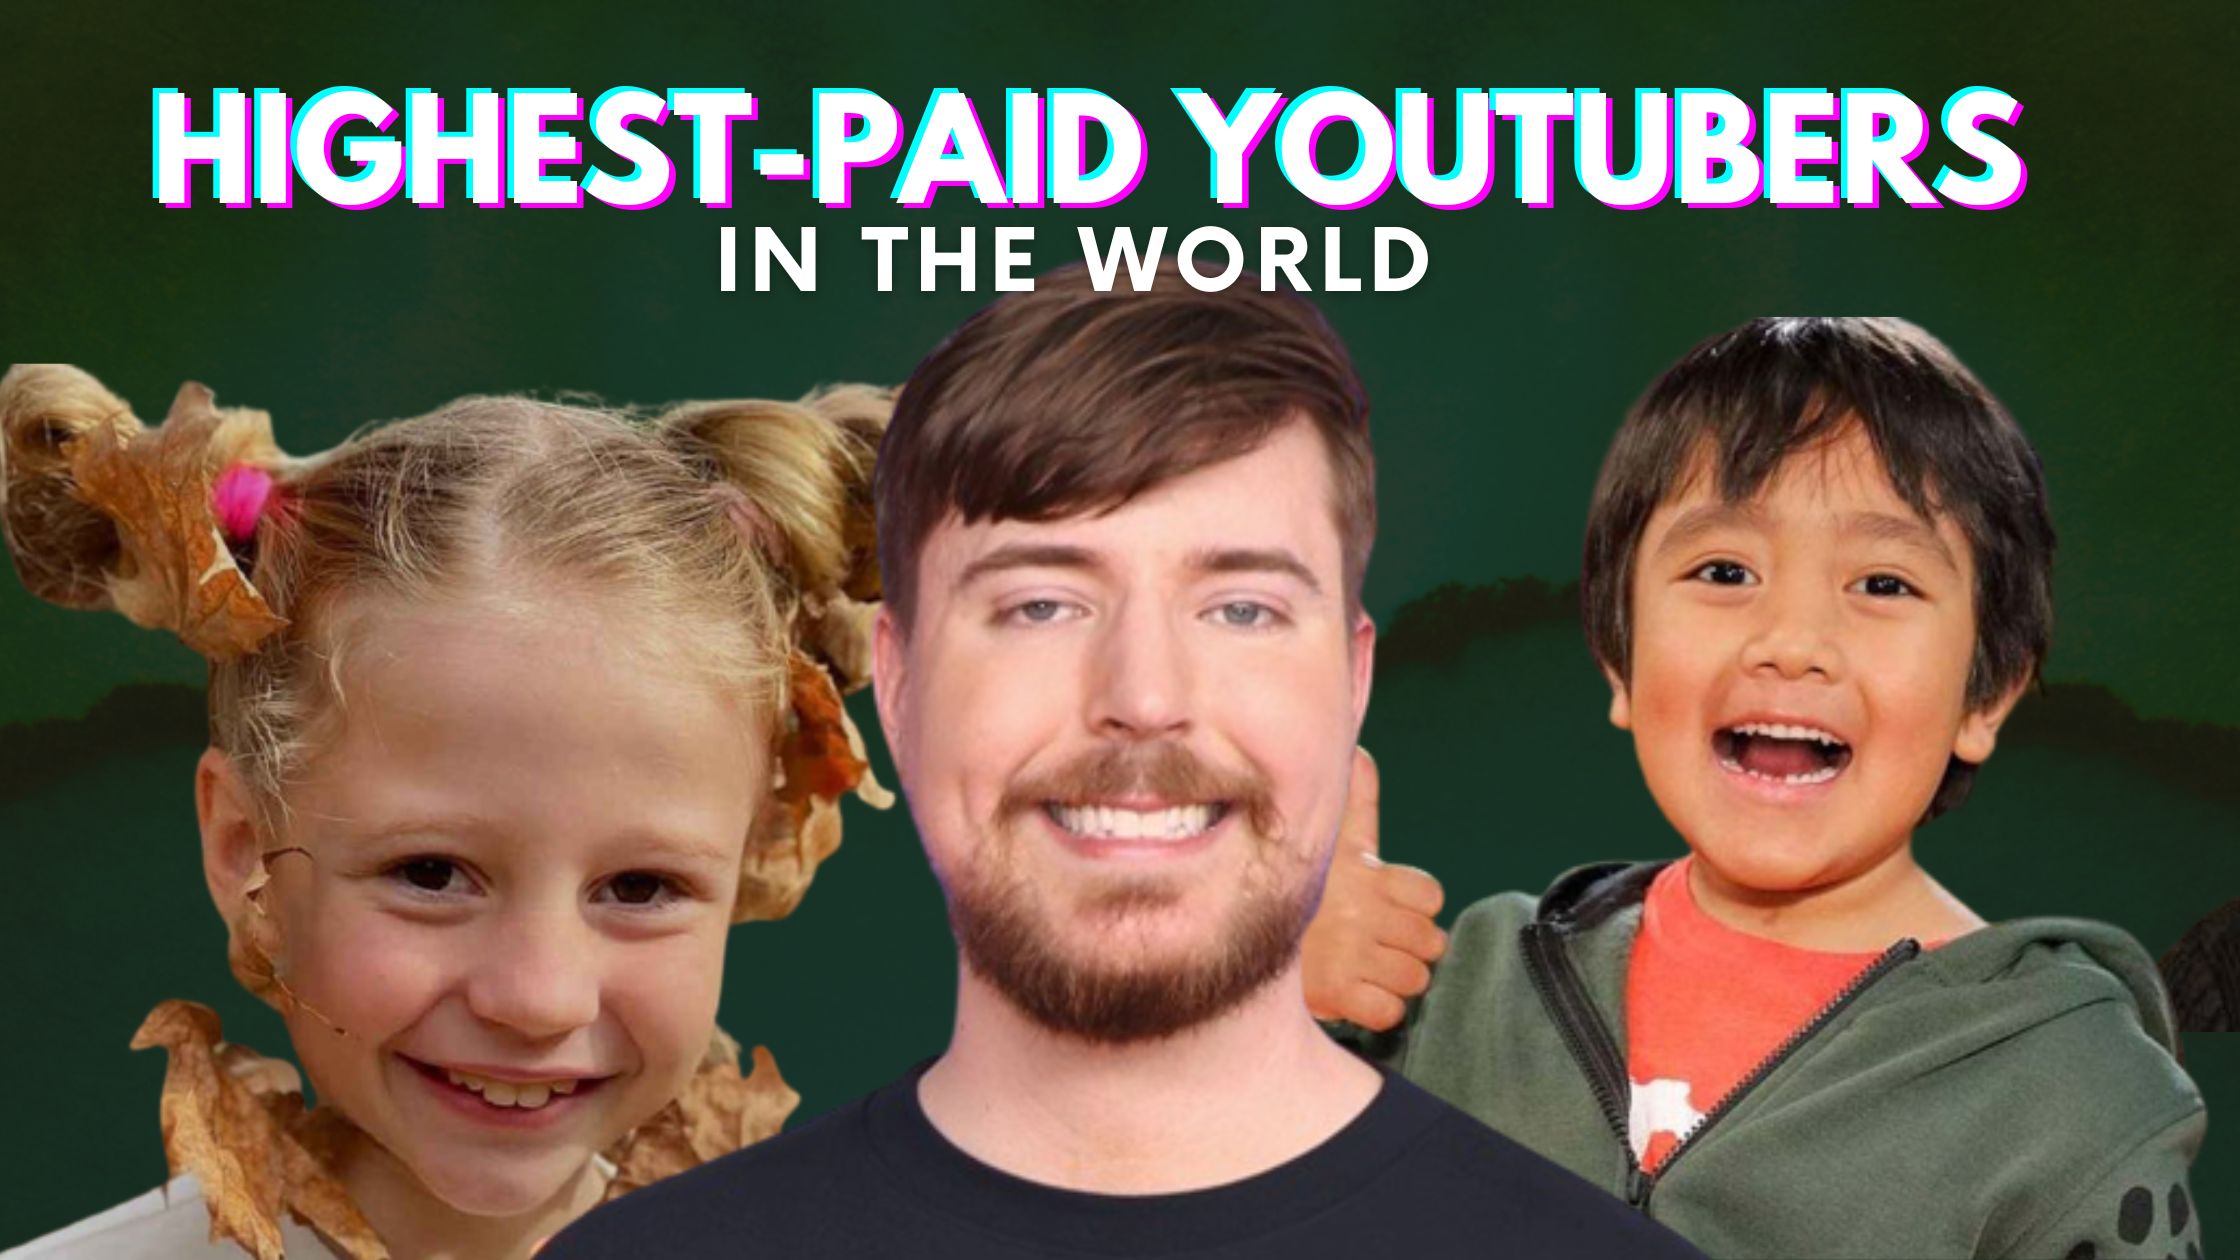 Top 10 HighestPaid Youtubers In The World (2023)